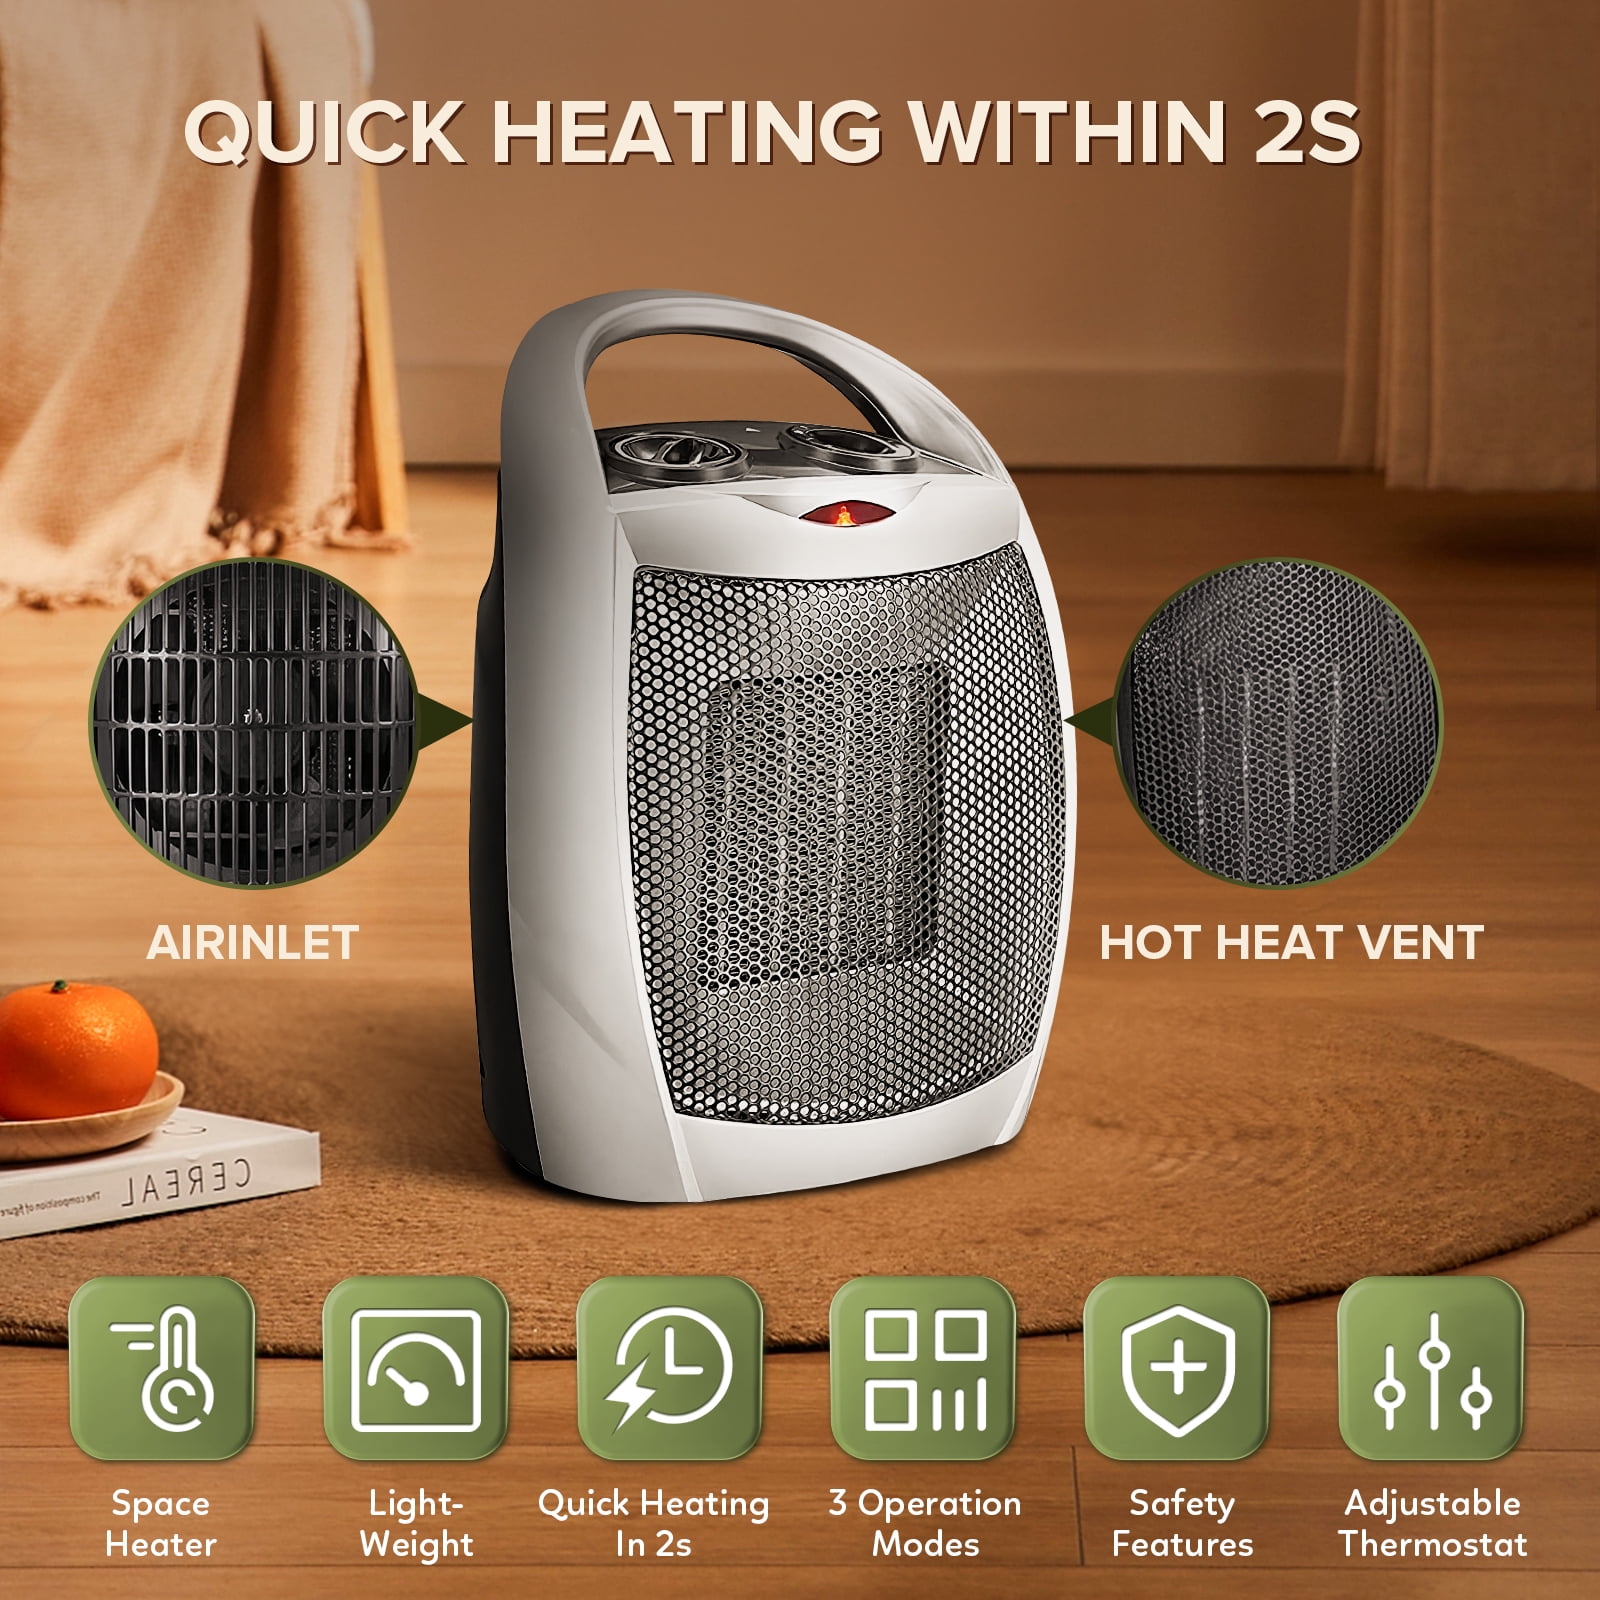 Do you need this? This is a very simple and easy to use shop heater. T